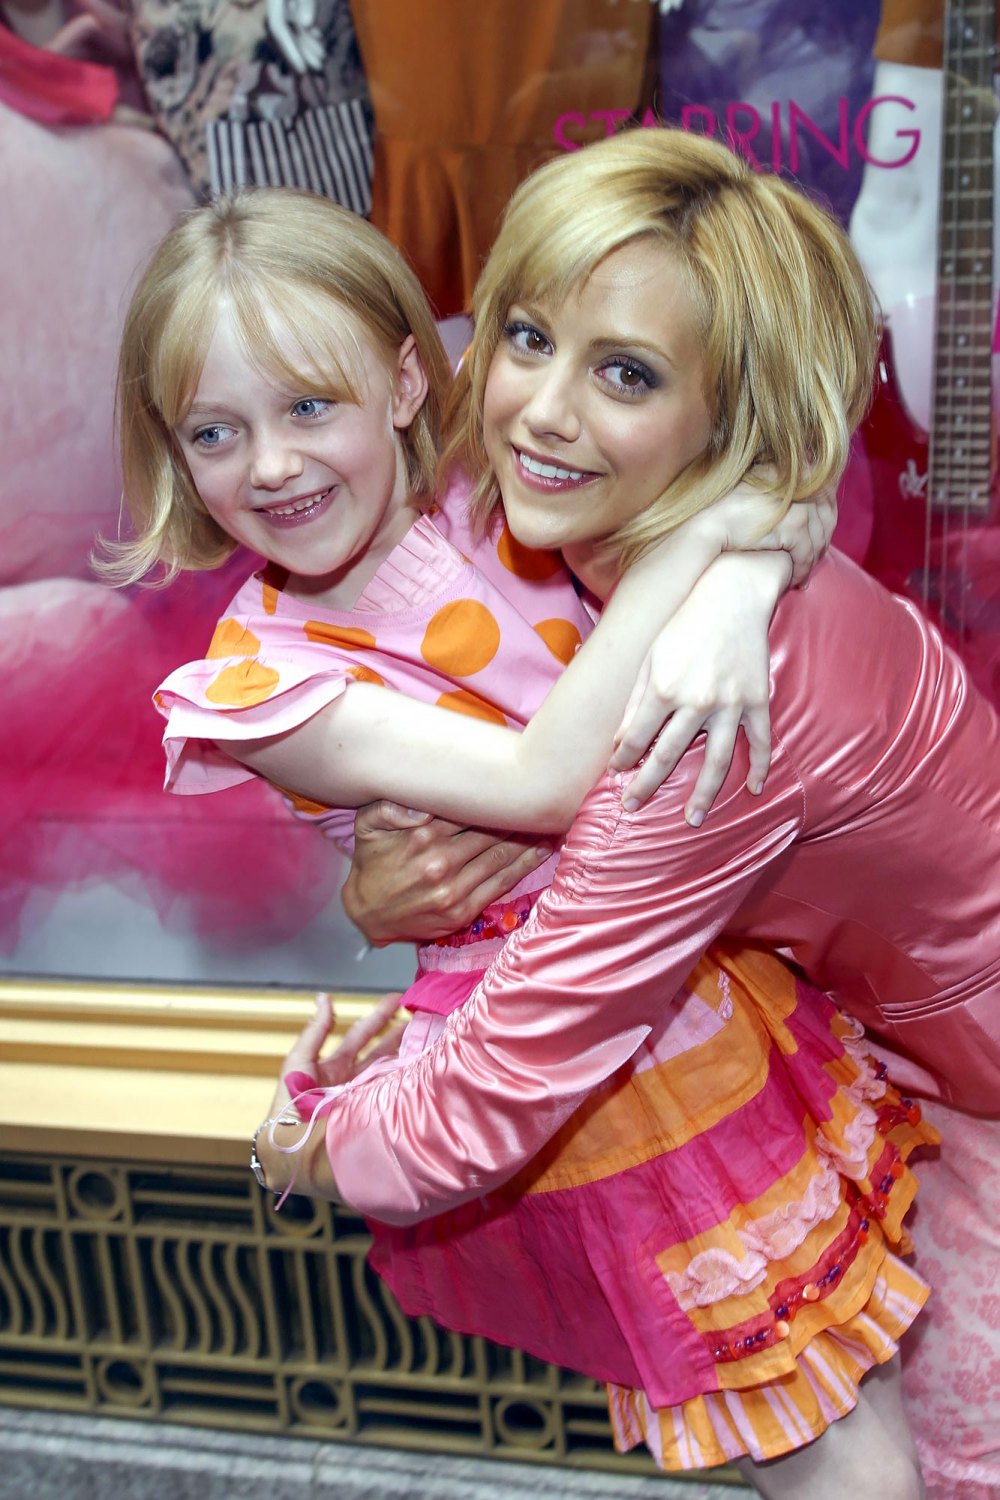 Dakota Fanning Gushes About Brittany Murphy After Clips From 'Uptown Girls' Go Viral: I 'Loved' Her